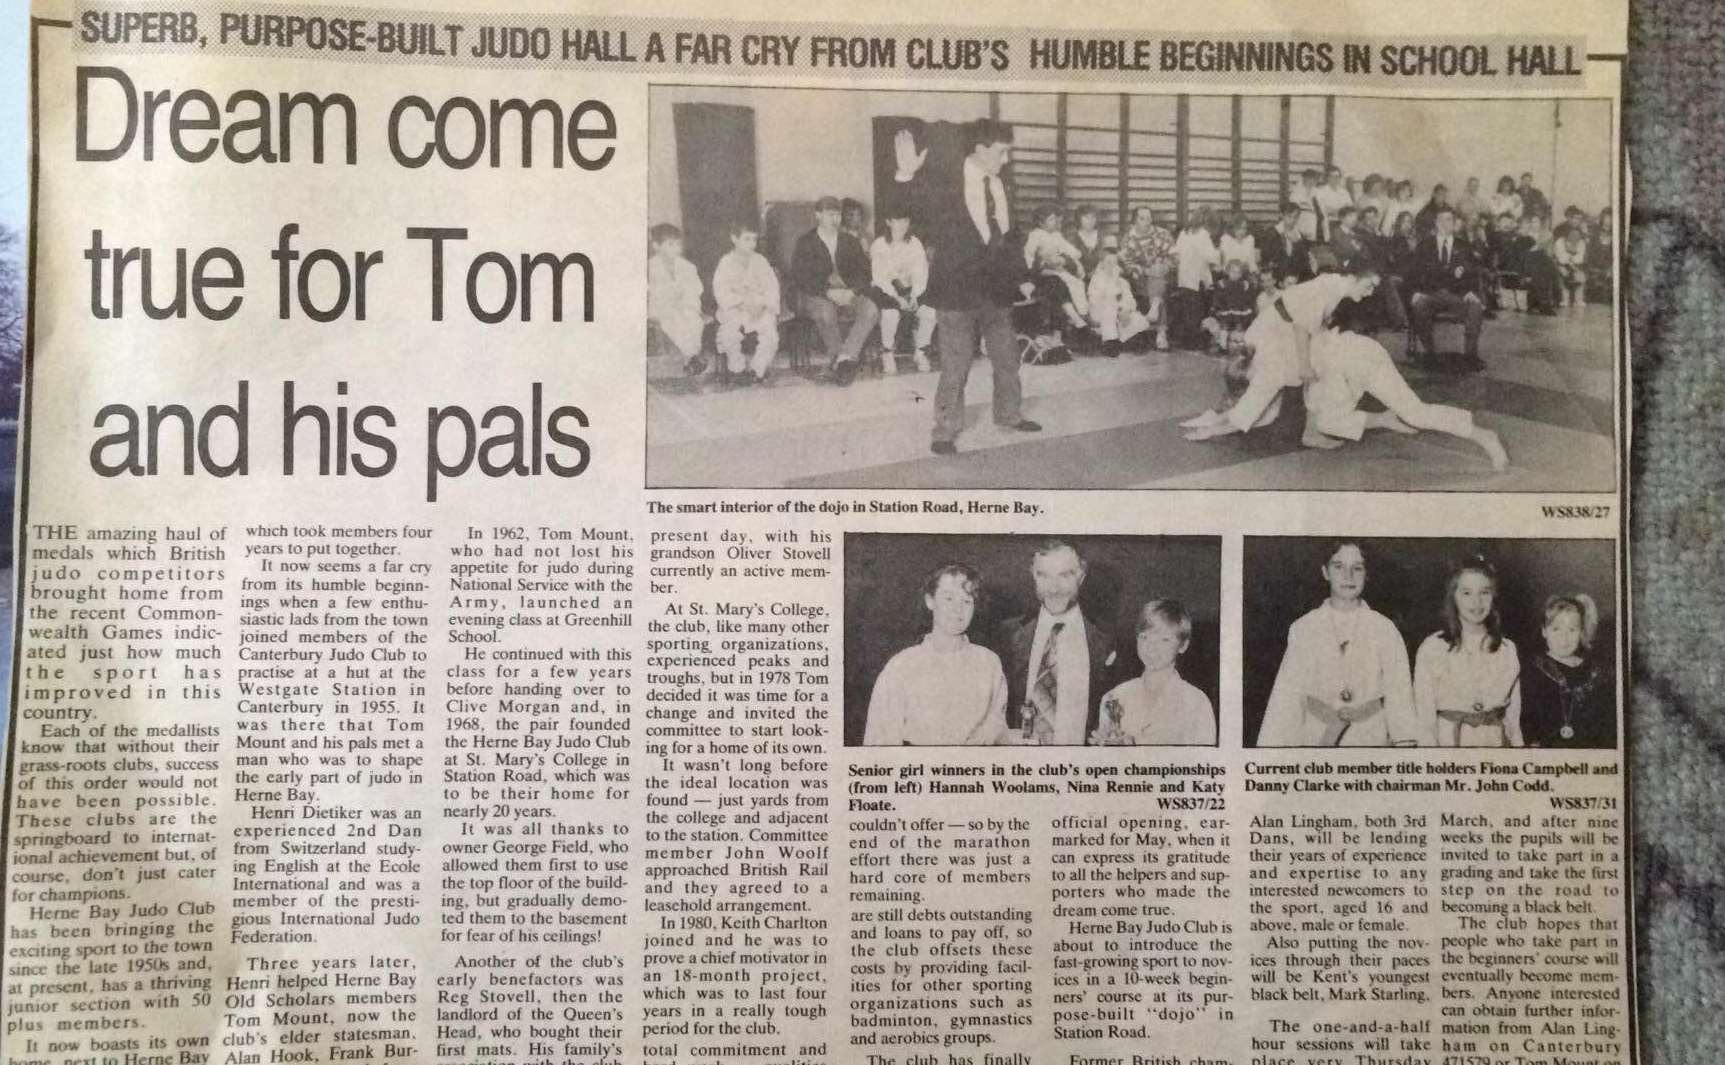 A report on the building's long-awaited opening in 1989